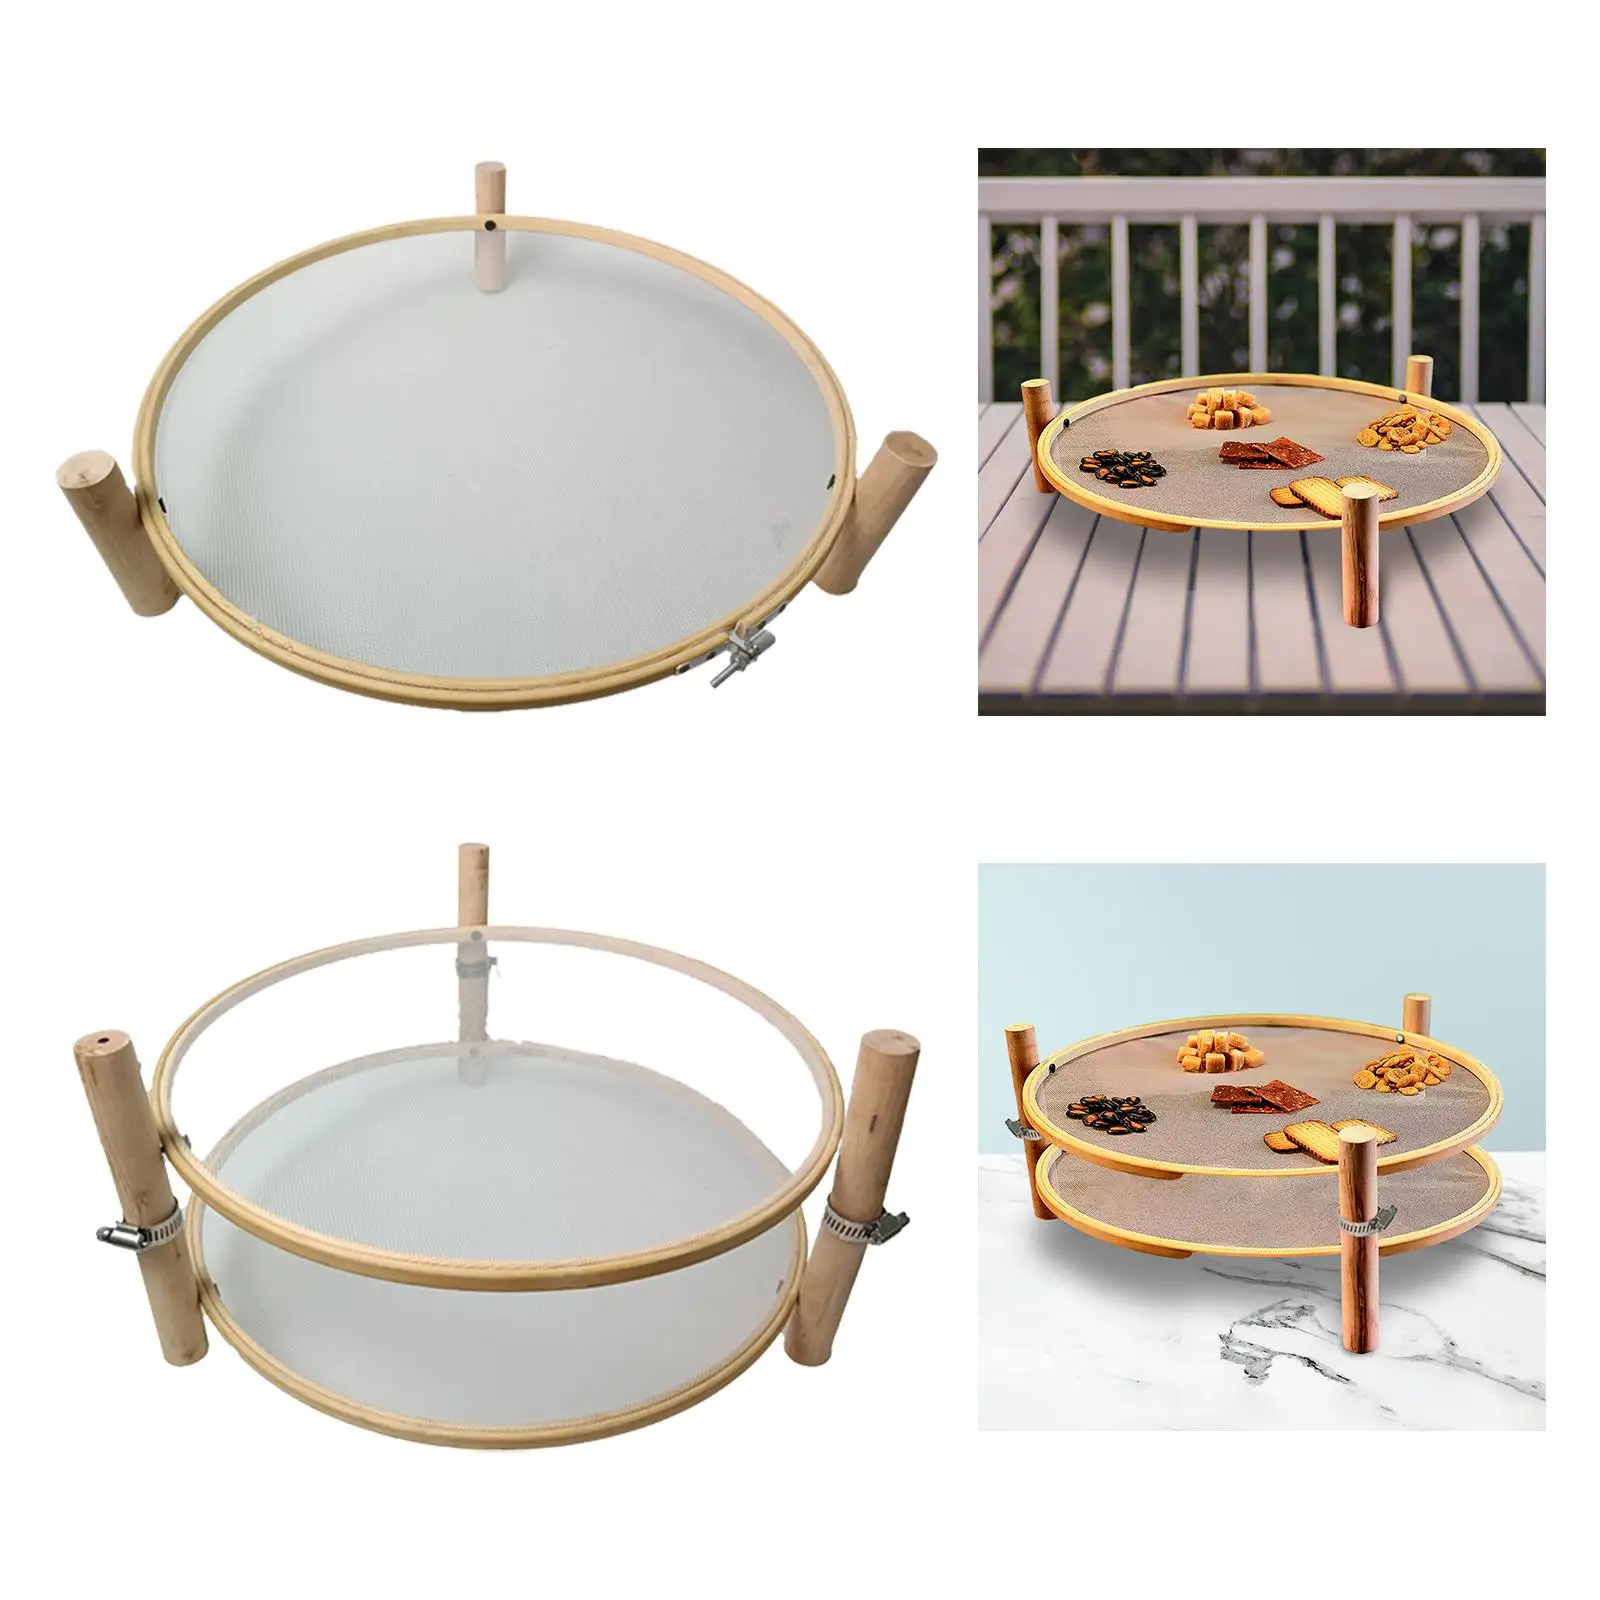 Round Pasta Drying Rack Kitchen Gadget Food Dryer Shelf Mesh Drying Net Household Dehydration Home Meat Vegetable Beef